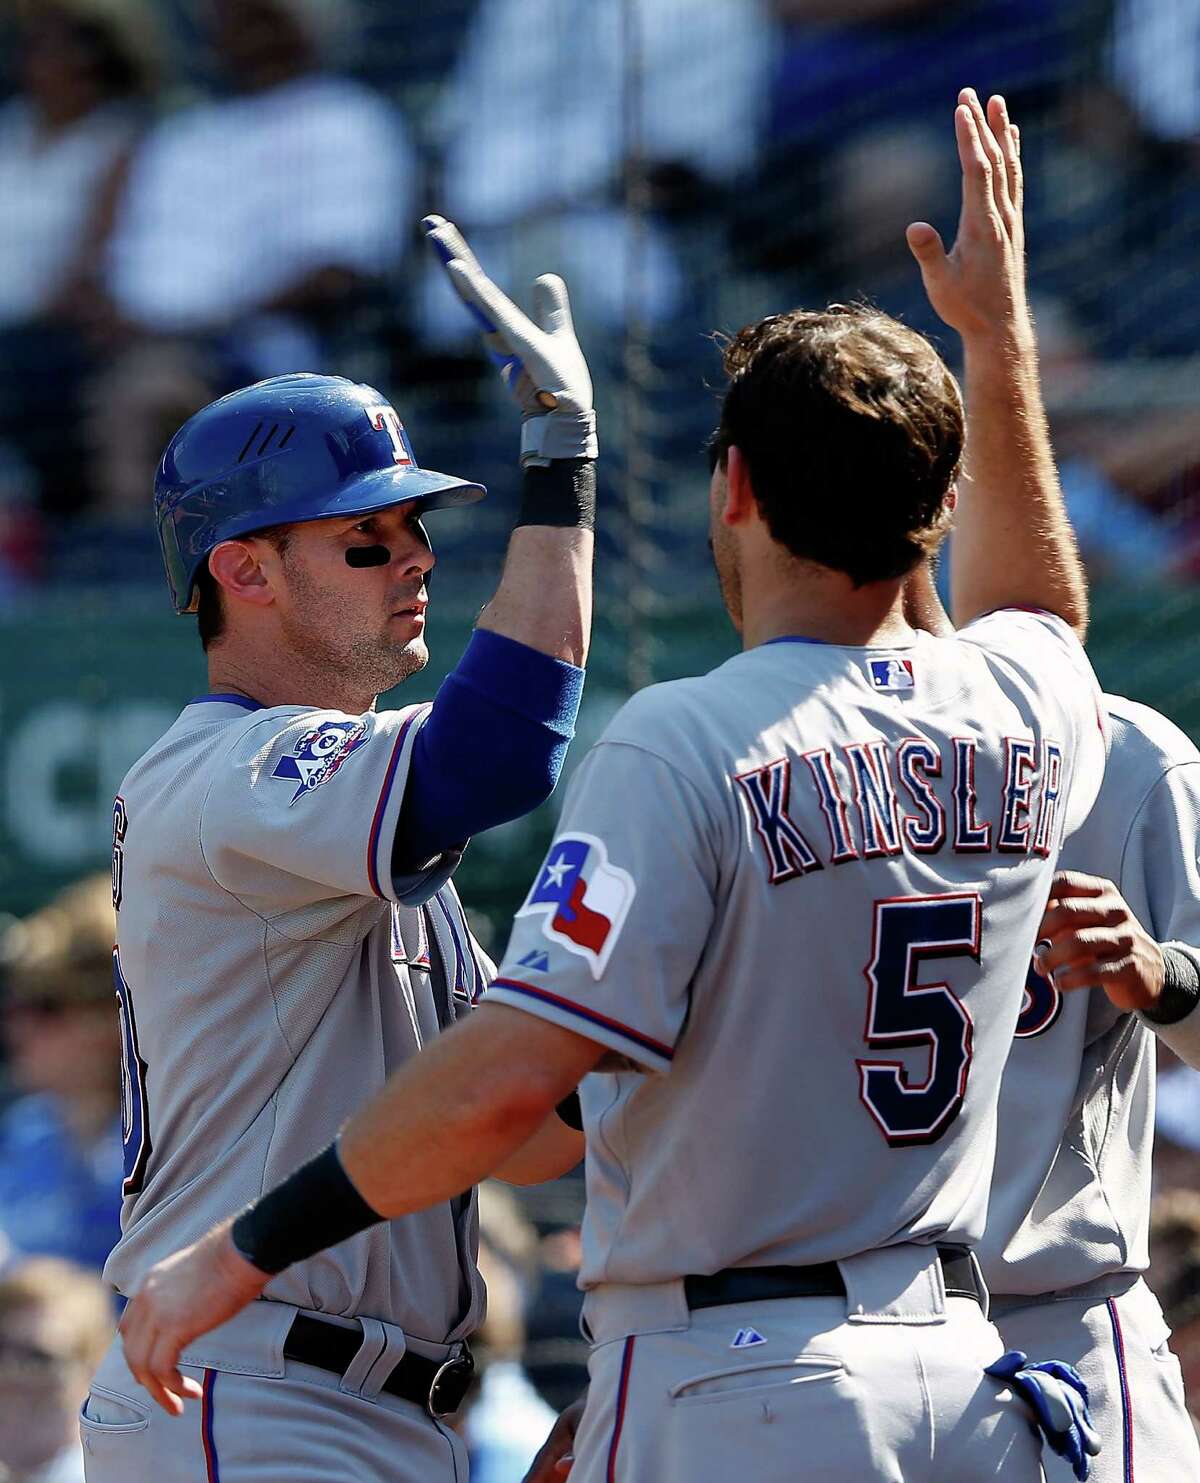 Michael Young (left) is congratulated by Rangers teammate Ian Kinsler after hitting a home run in the eighth.